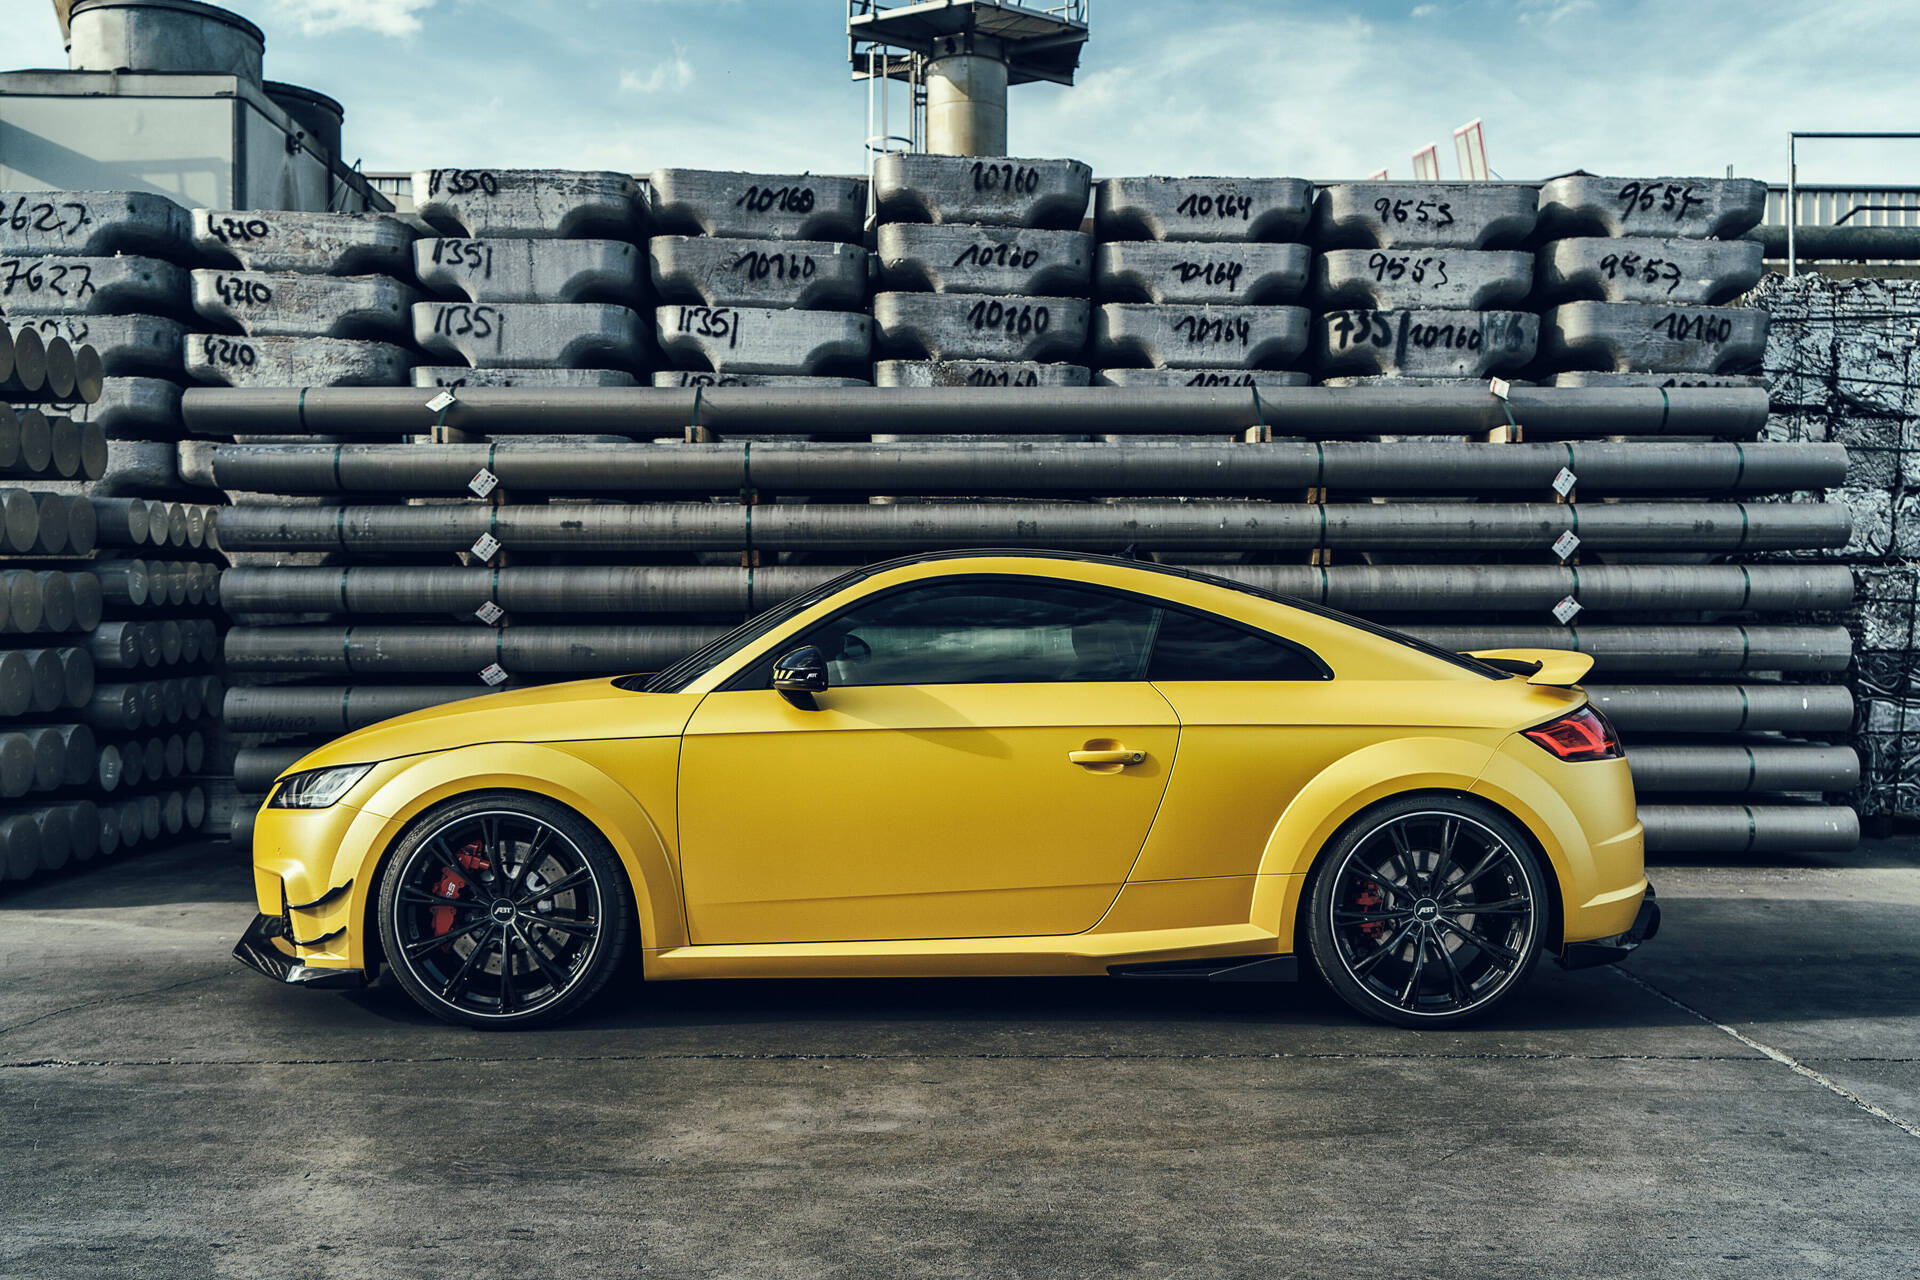 Abt Power Upgrade Wheels And Exhaust System For 2019 Audi Tt Rs